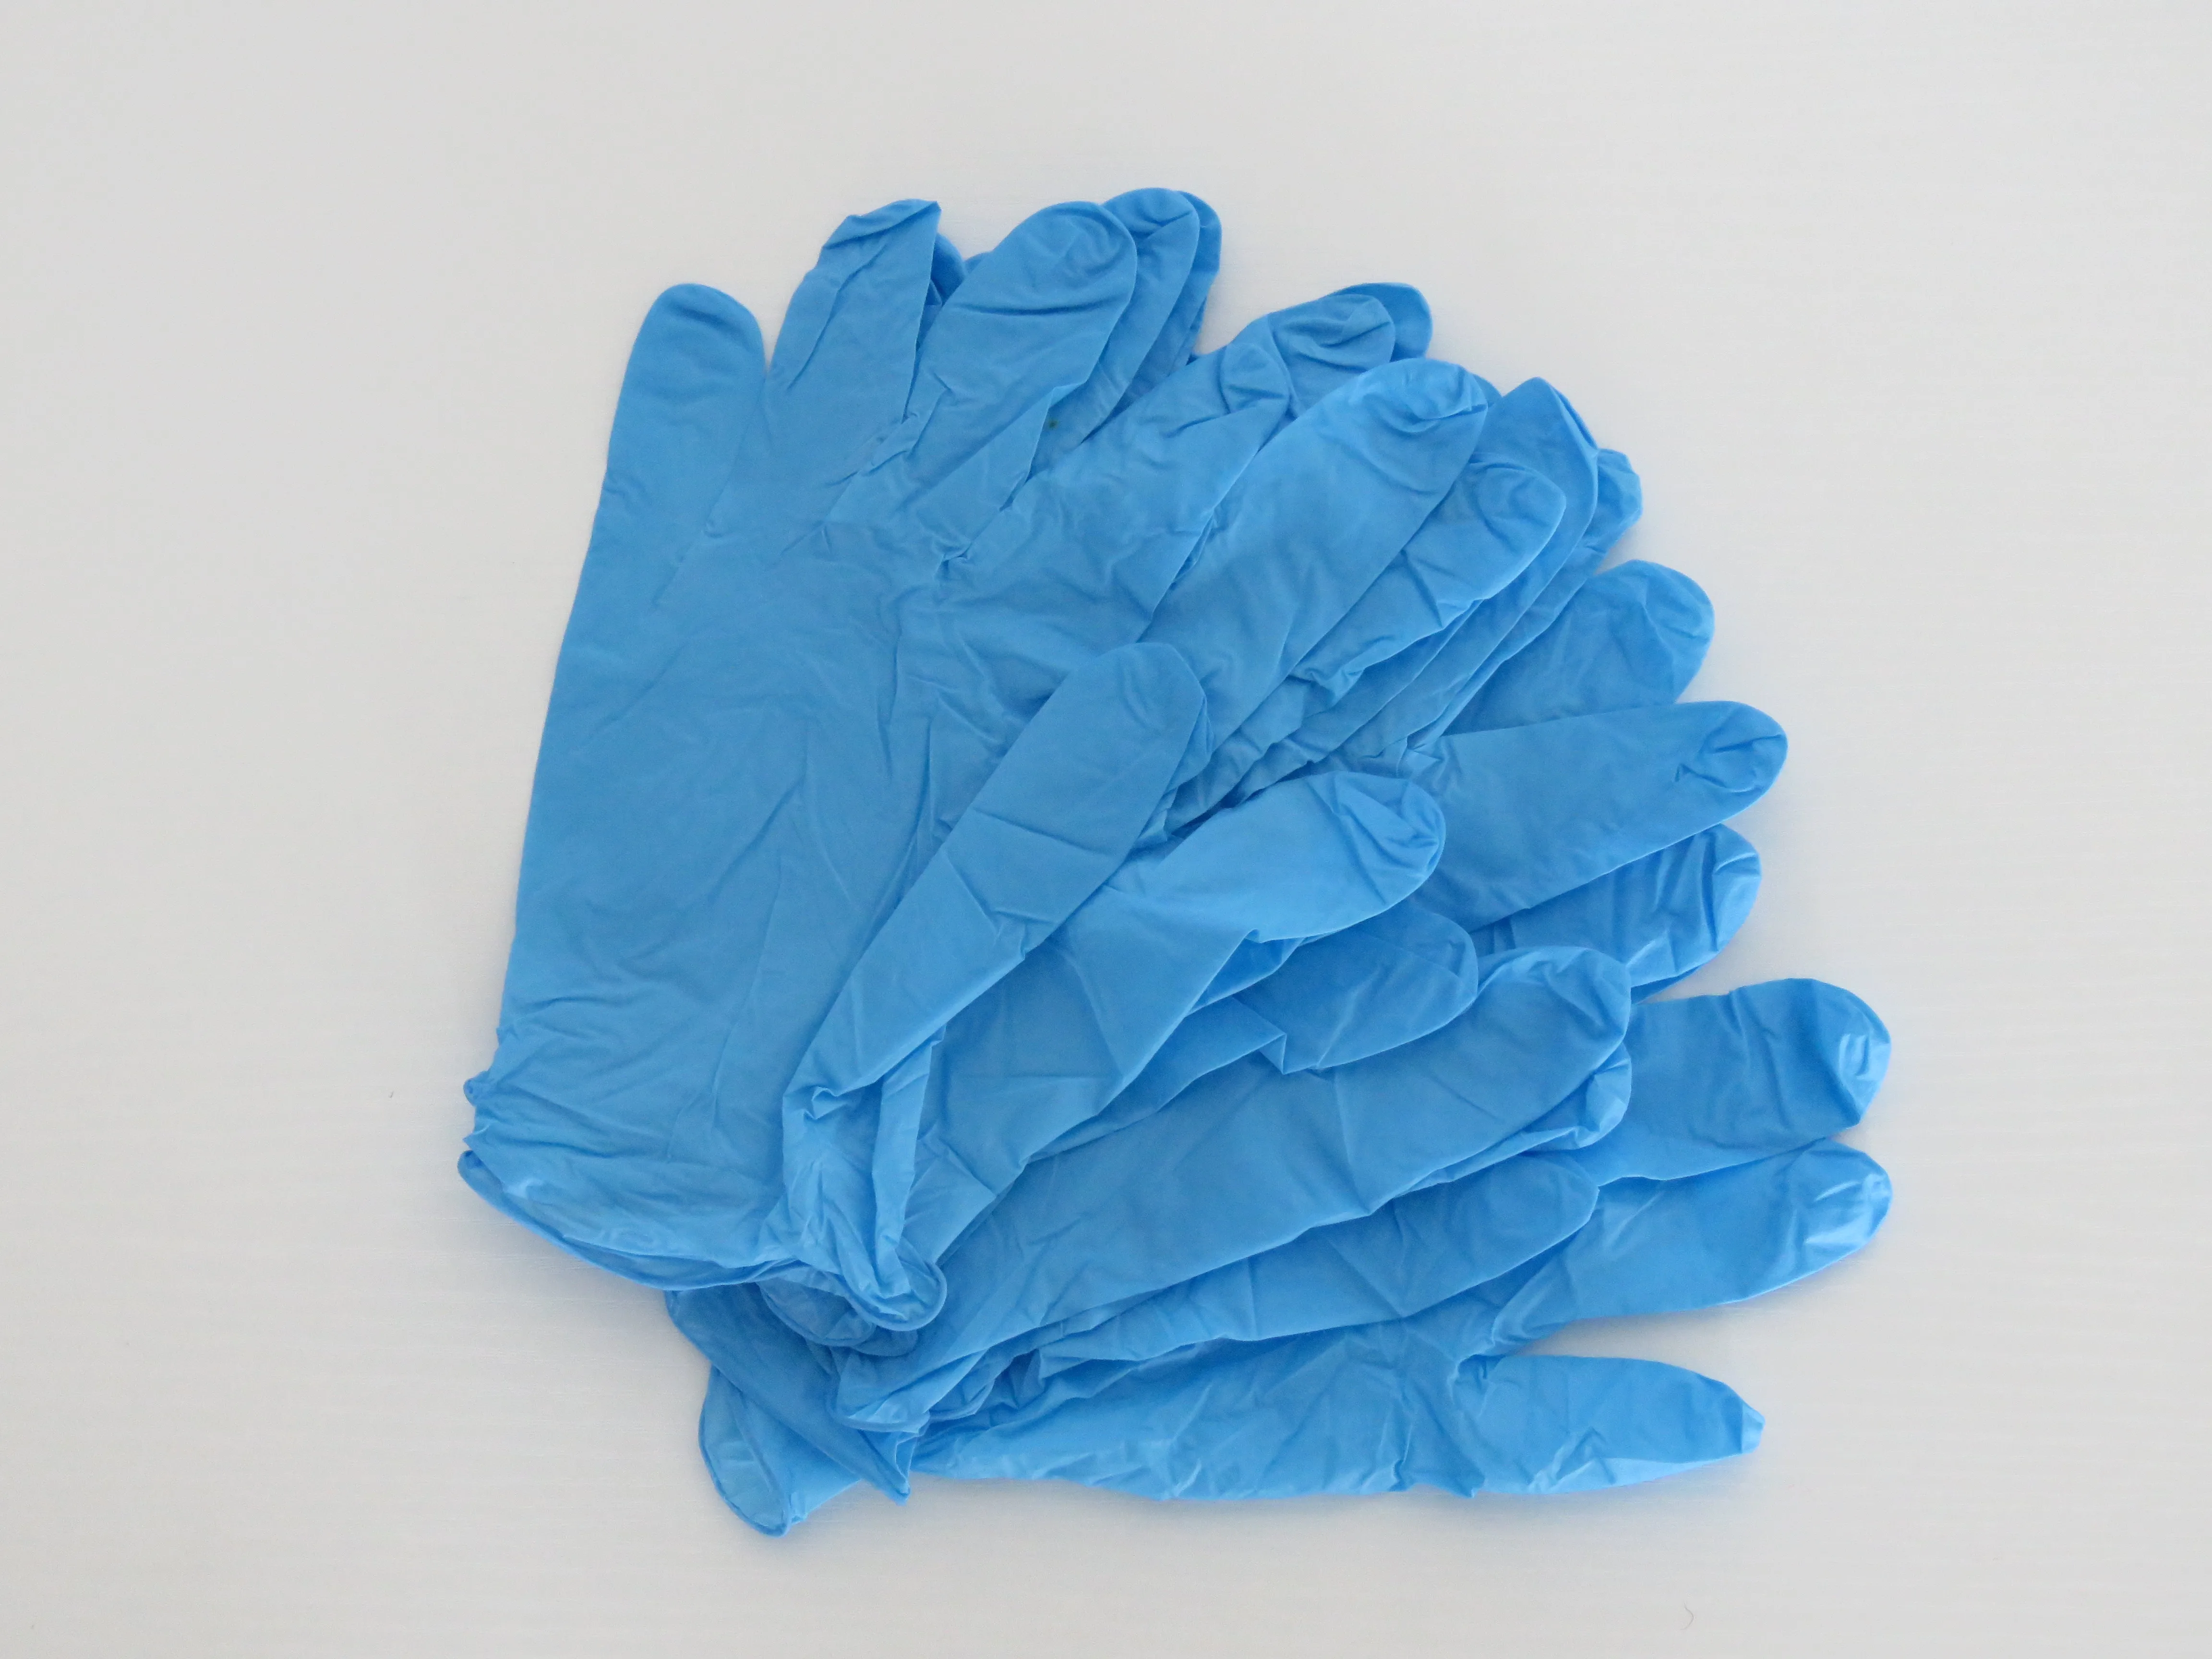 
Wholesale Blue Nitrile Gloves Powder Free Non-Medical Nitrile Gloves With High Quality Disposable NItrile gloves 